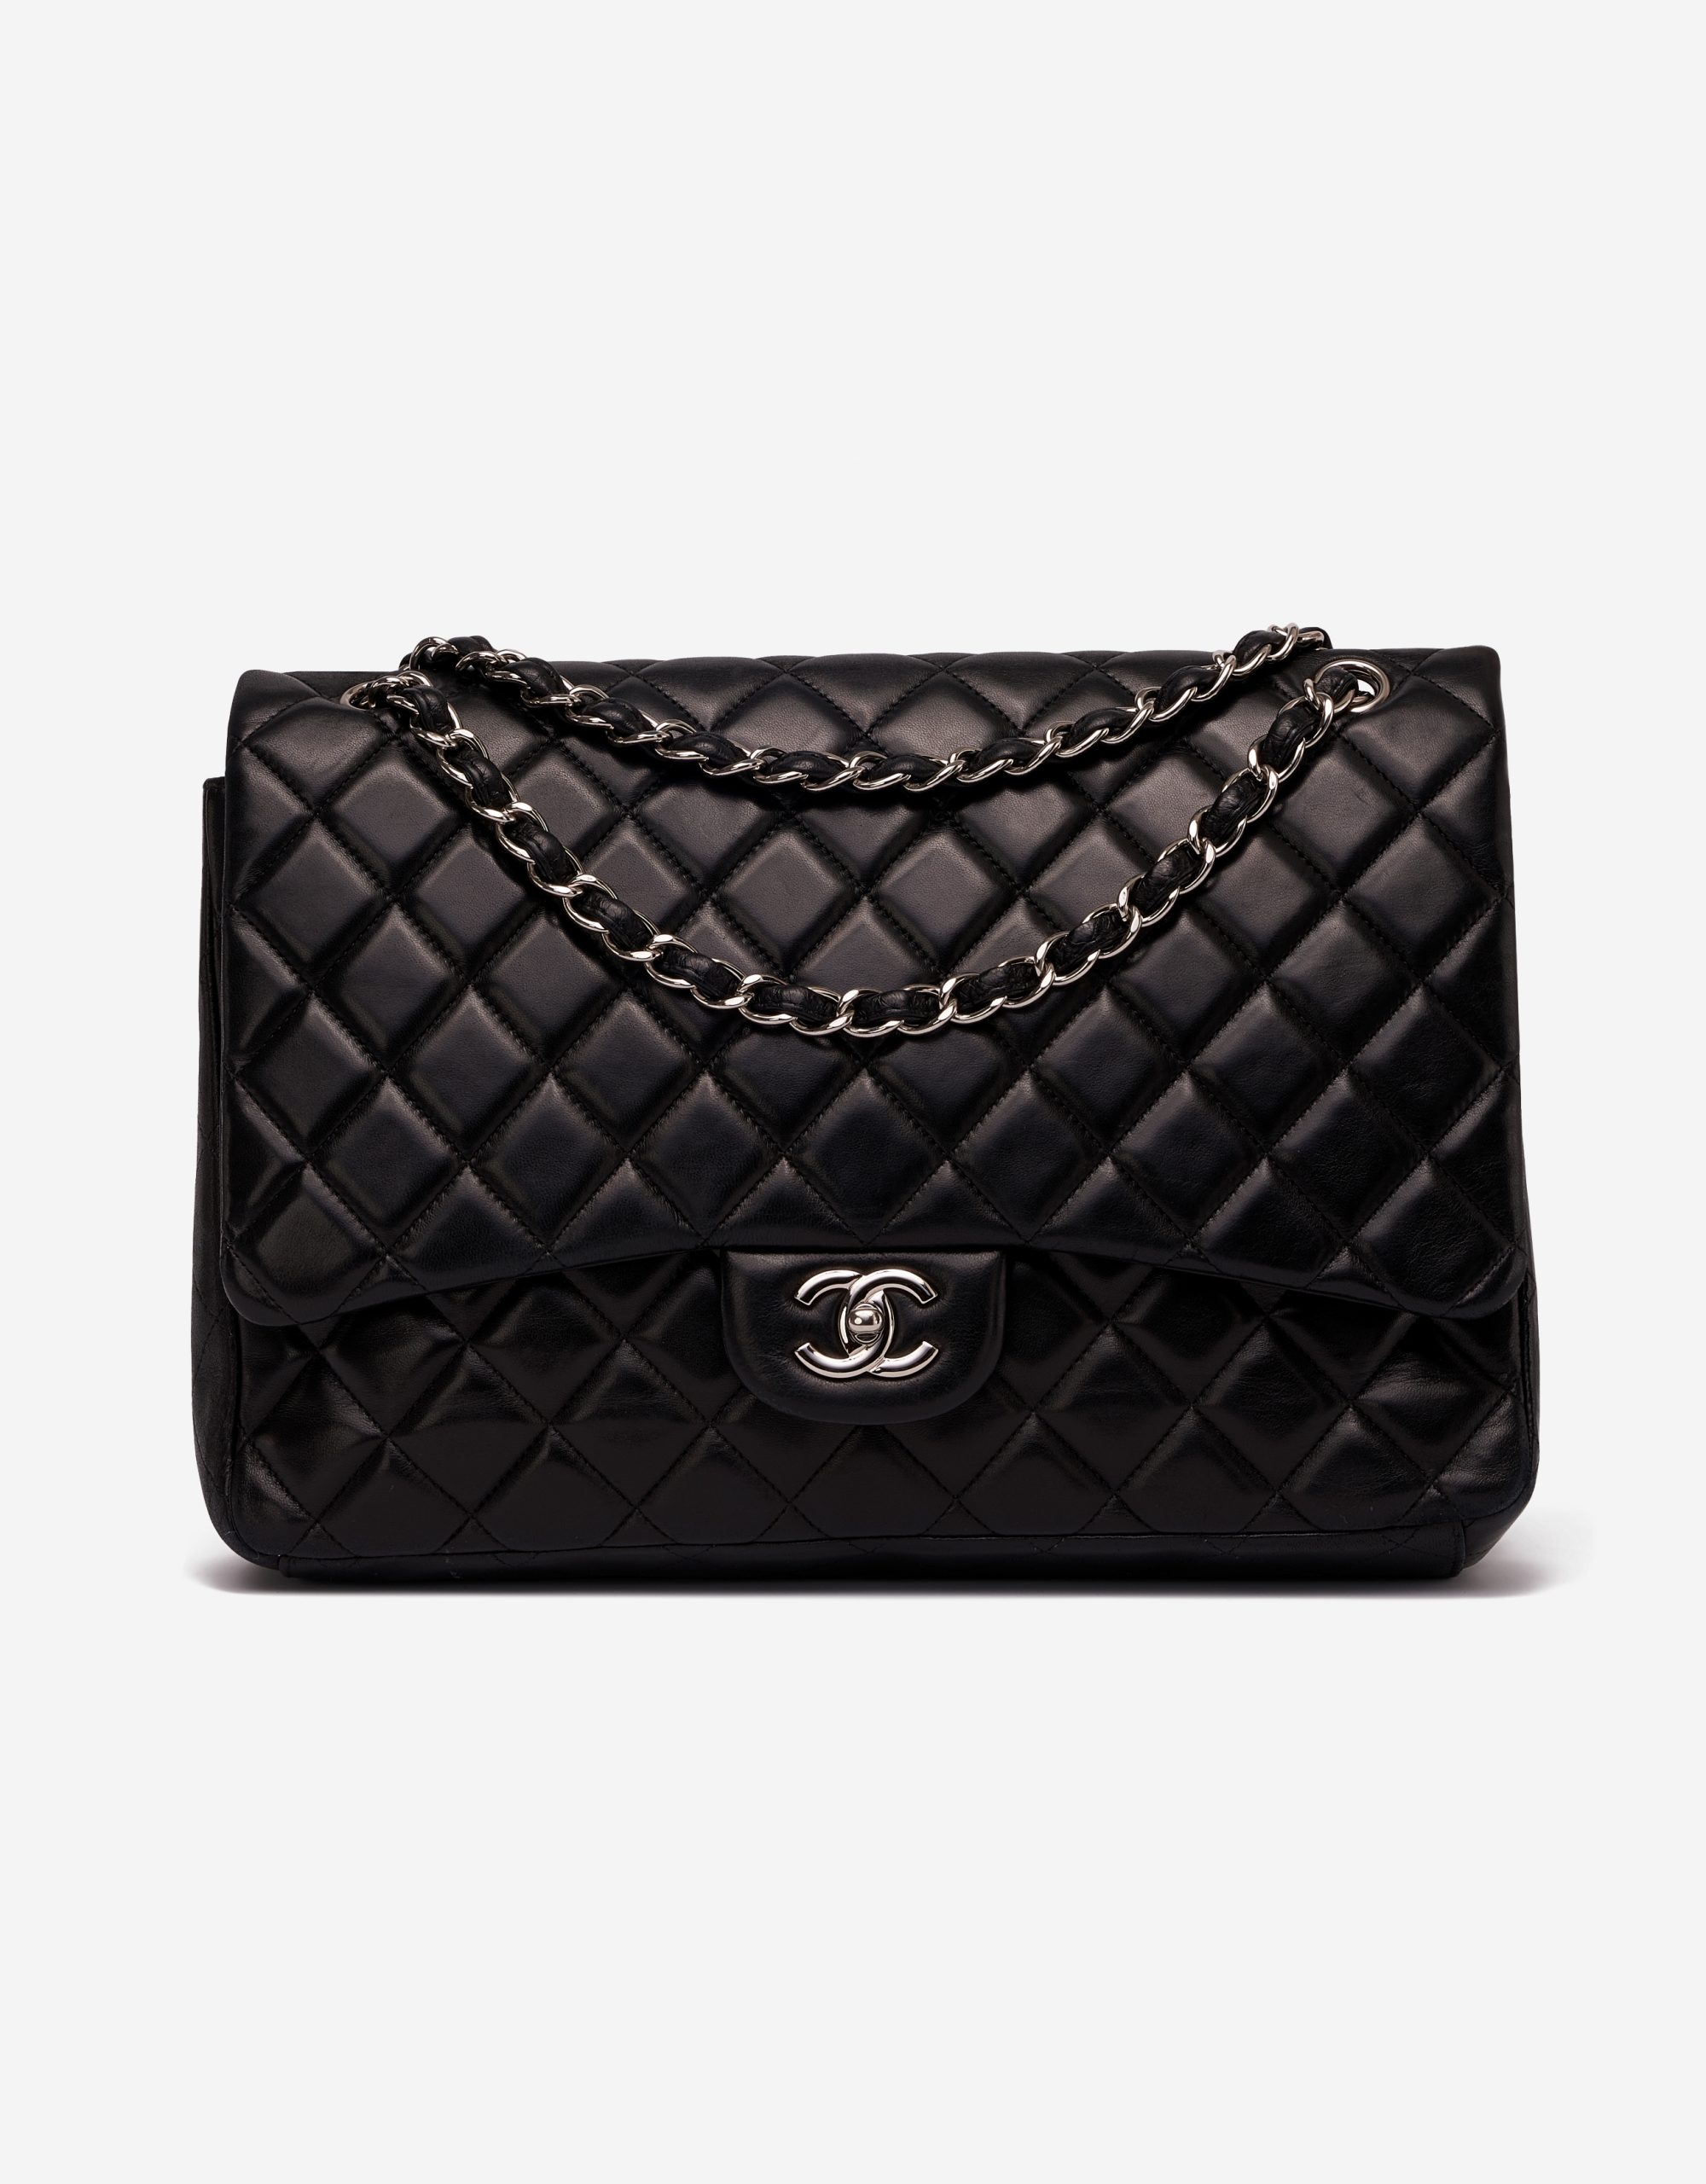 Handbags Chanel Chanel White Quilted Soft Caviar Leather Maxi Classic Single Flap Bag with Silver HW